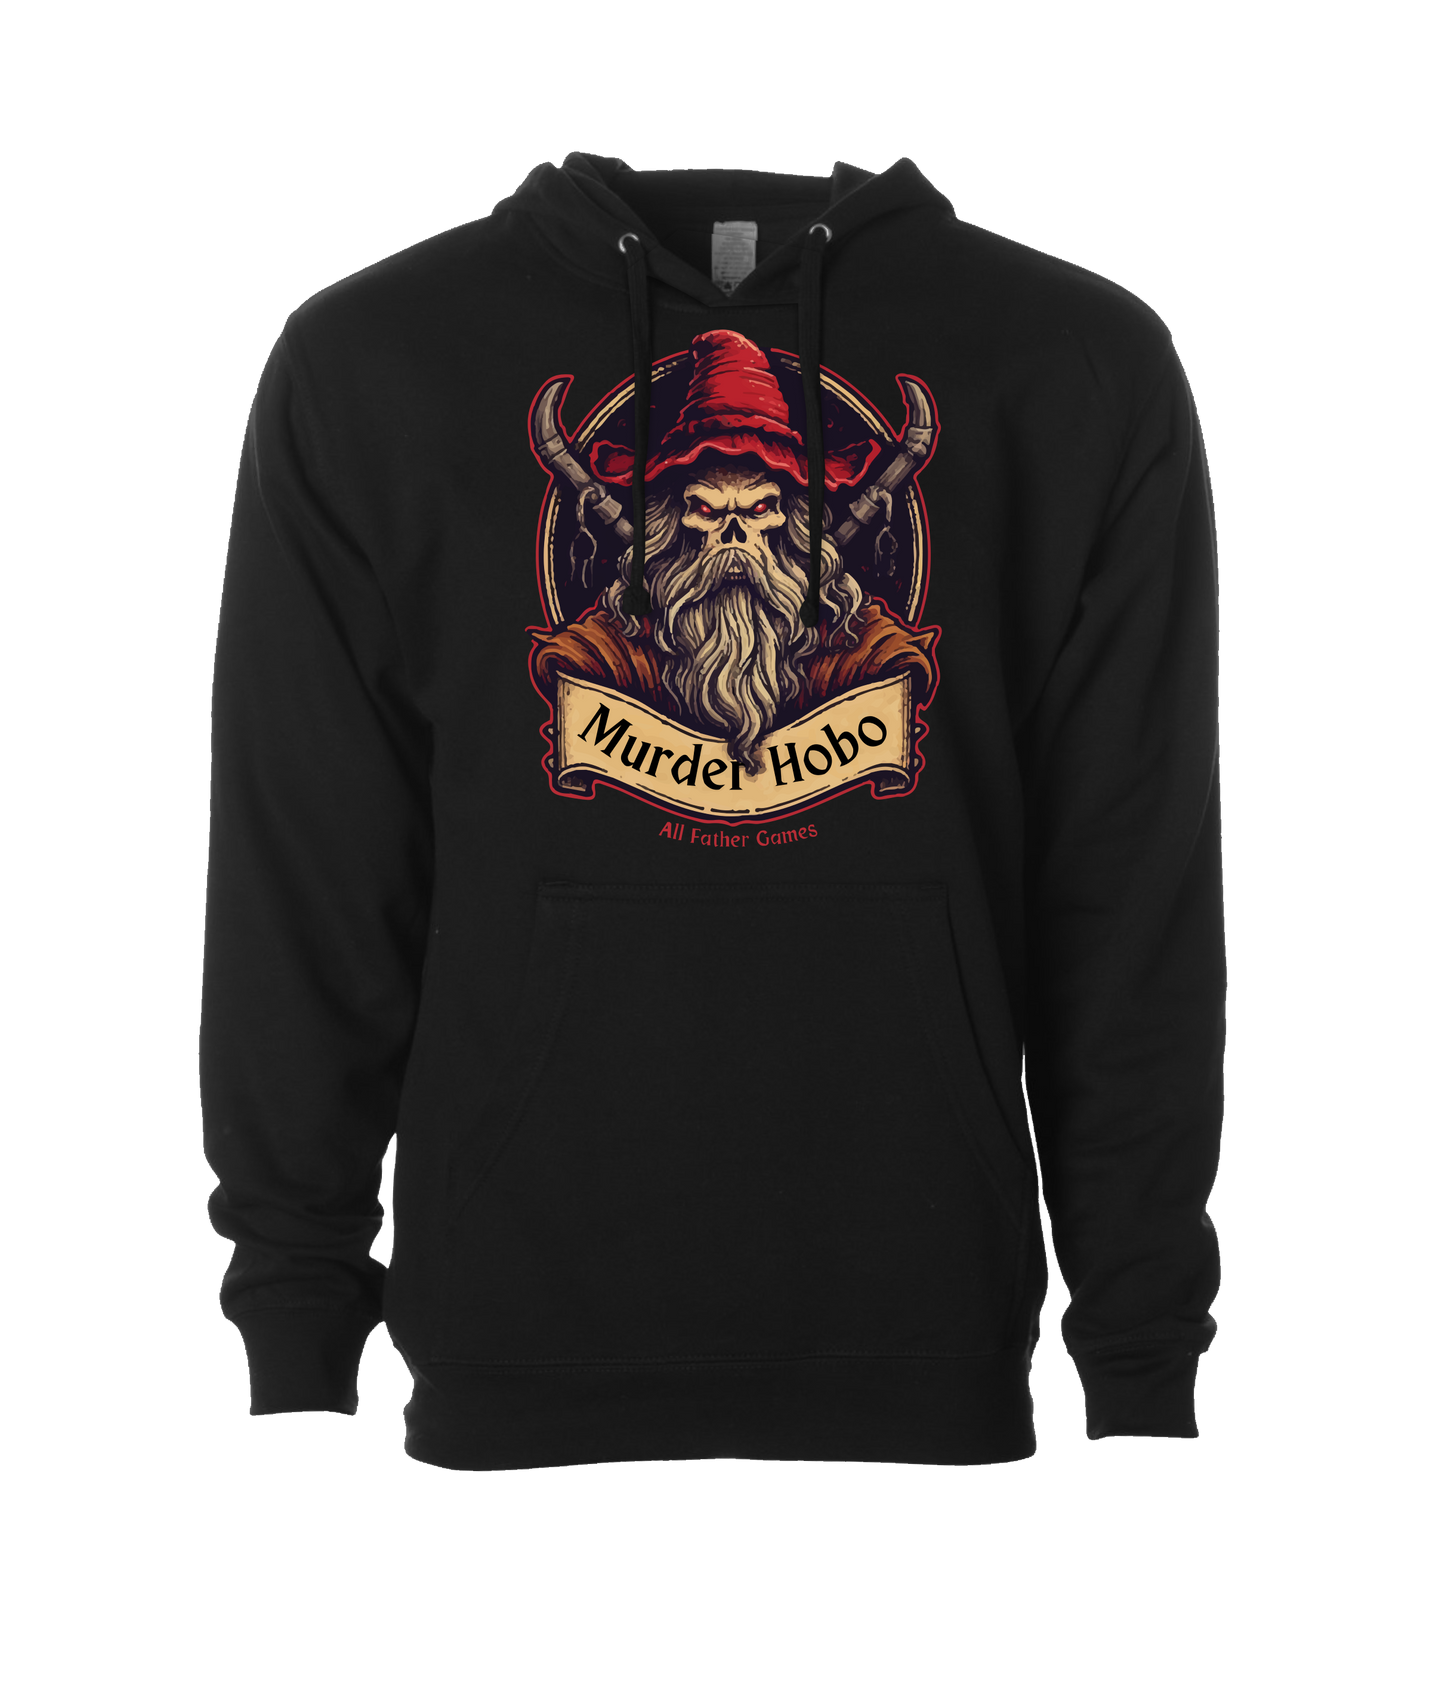 All Father Games - MURDER HOBO - Black Hoodie